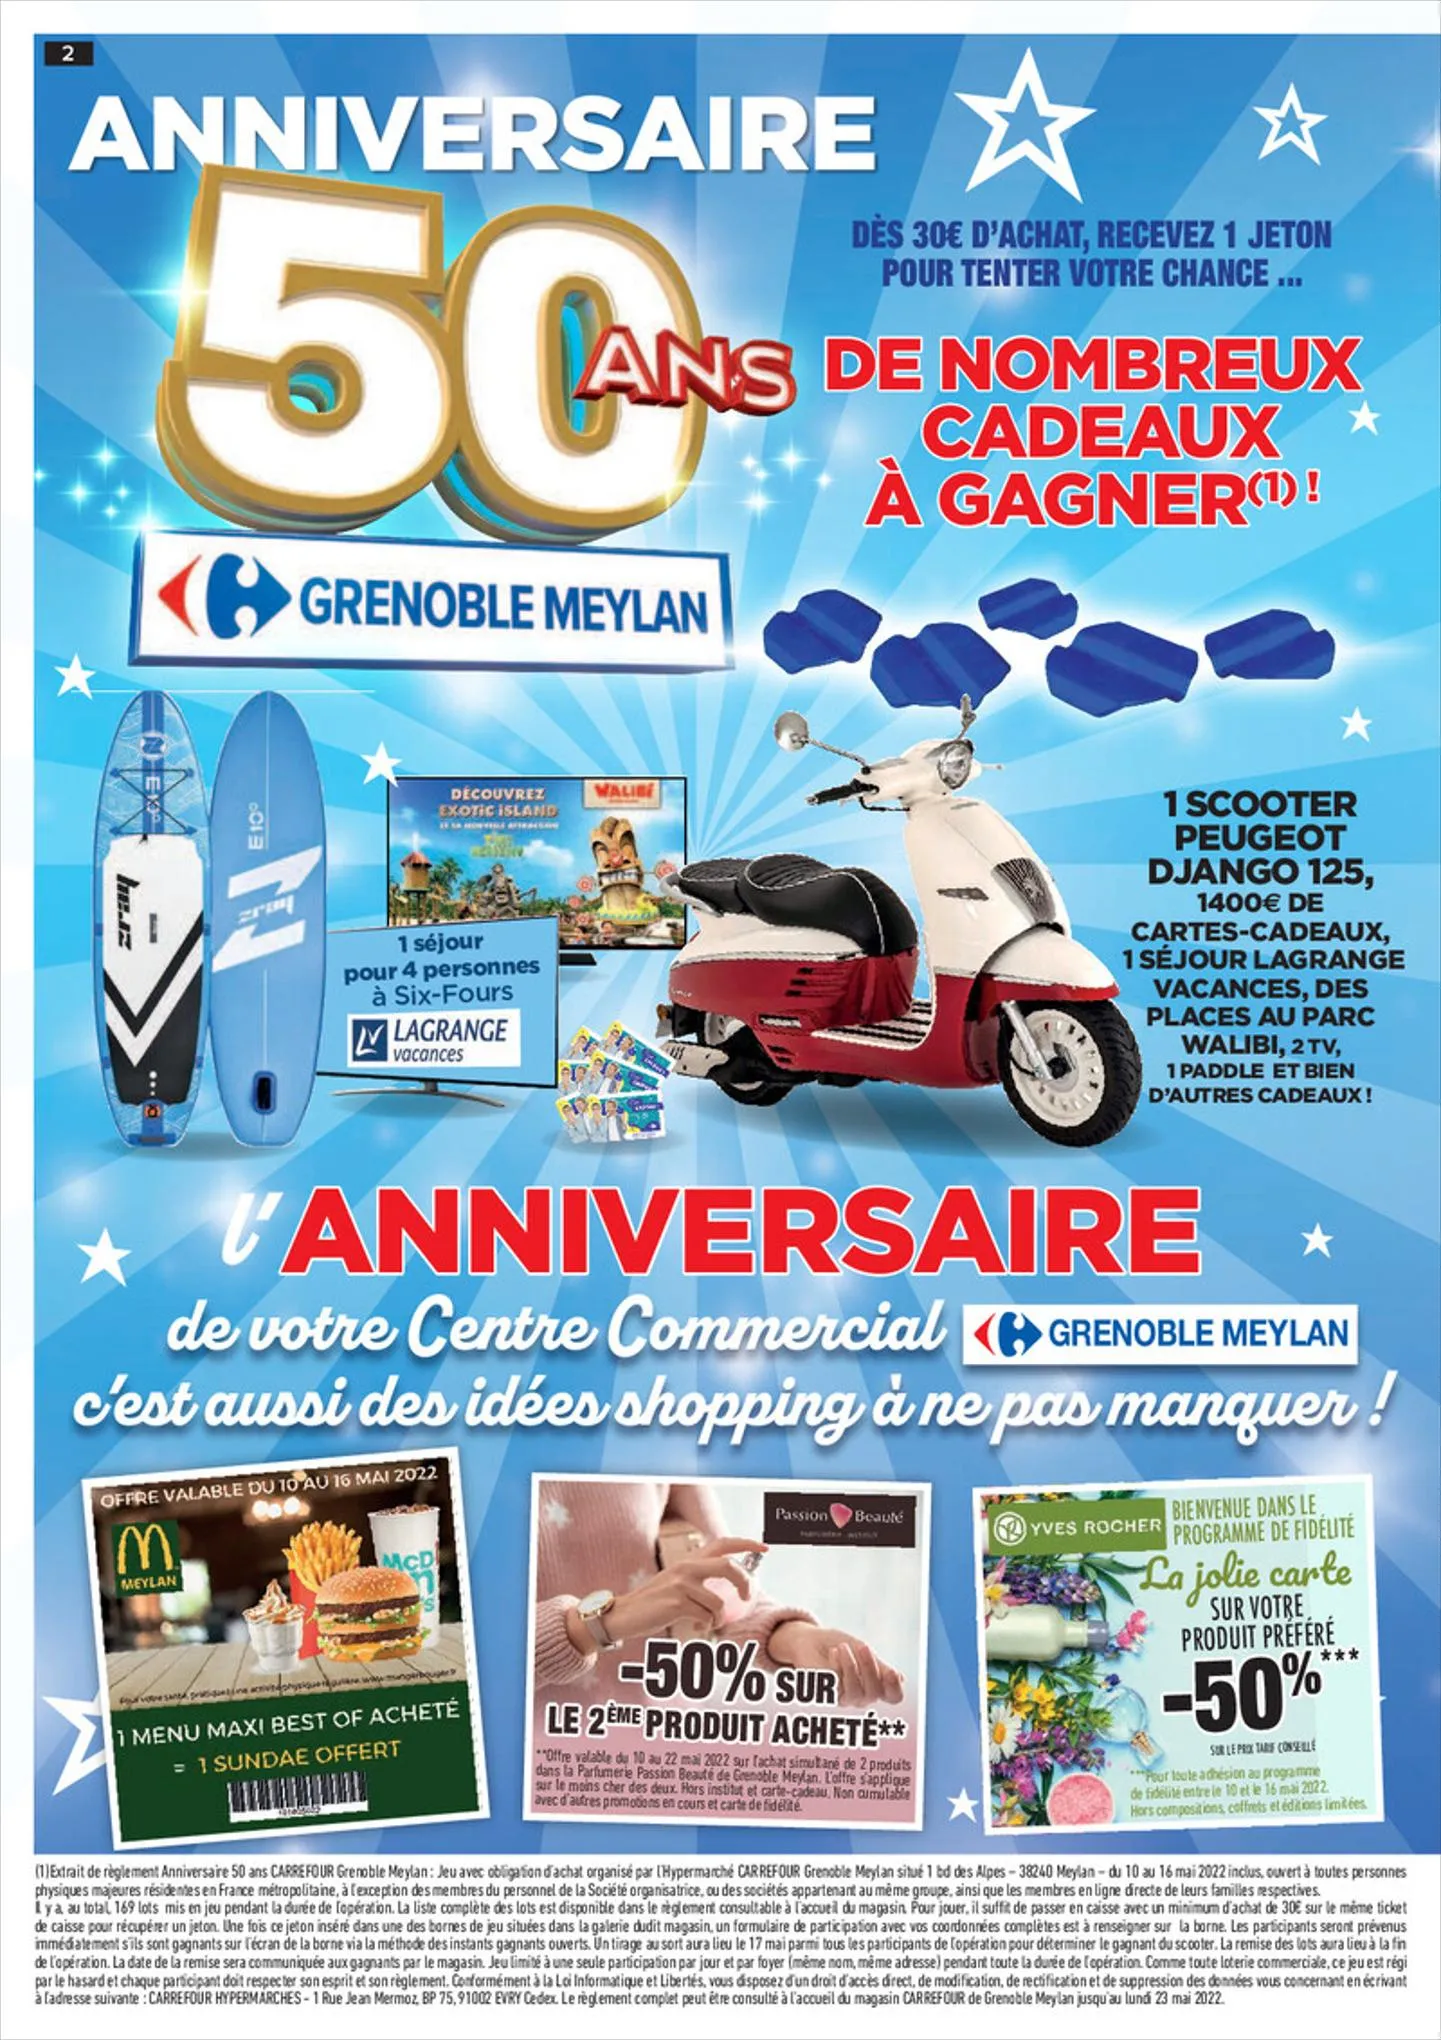 Catalogue Anniversaire 50 ans Grenoble Meylan, page 00002